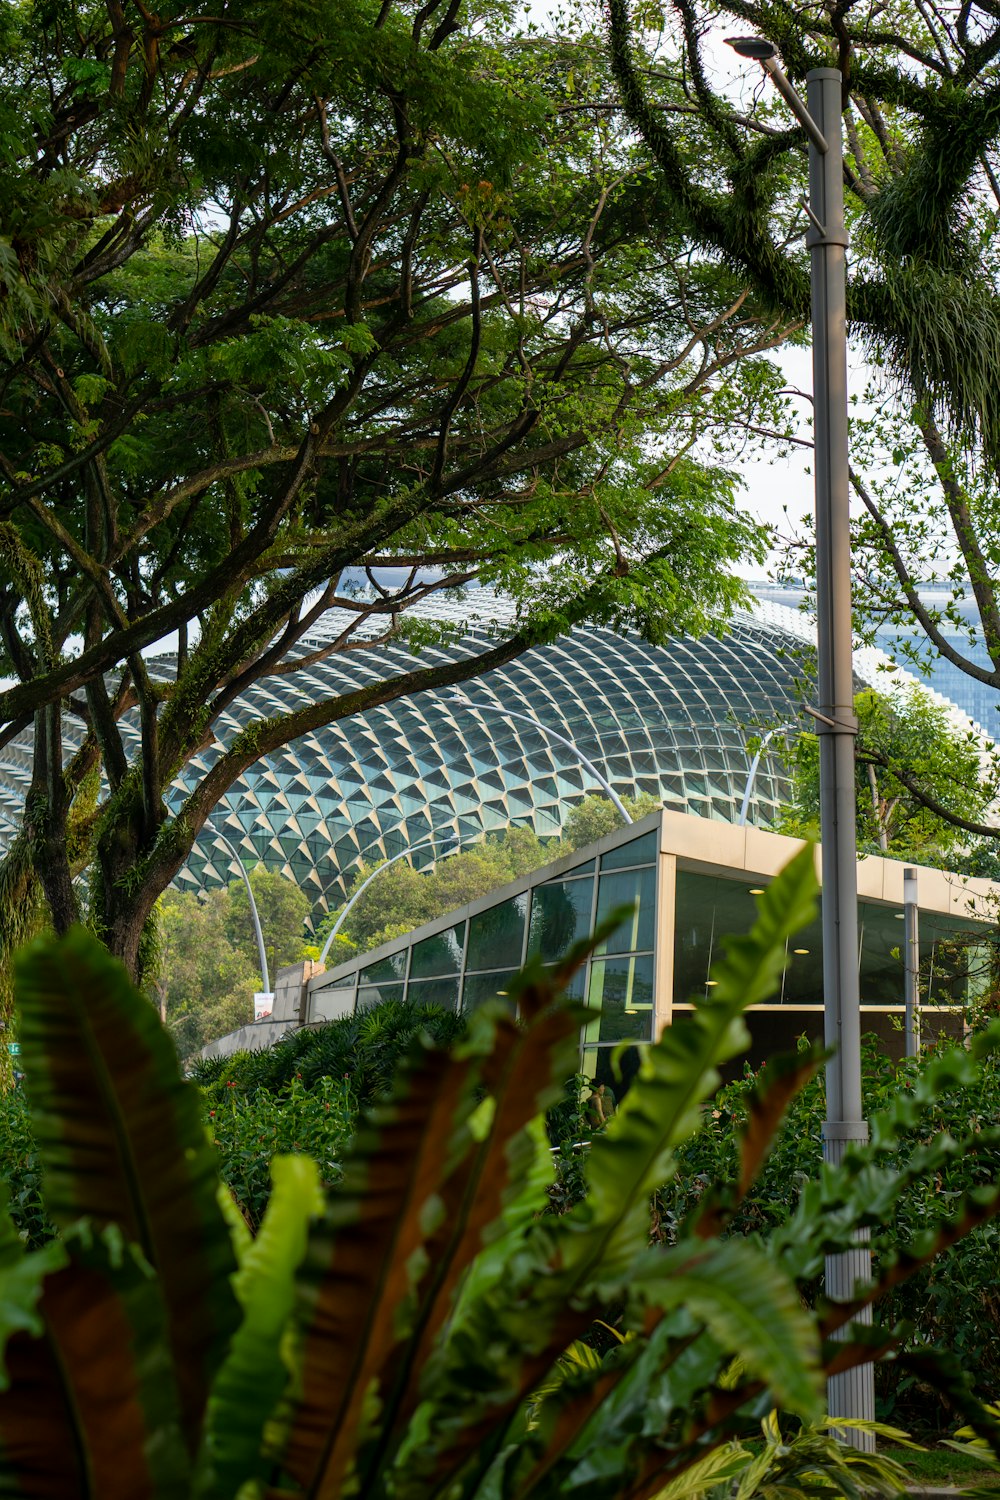 a green house surrounded by trees and plants